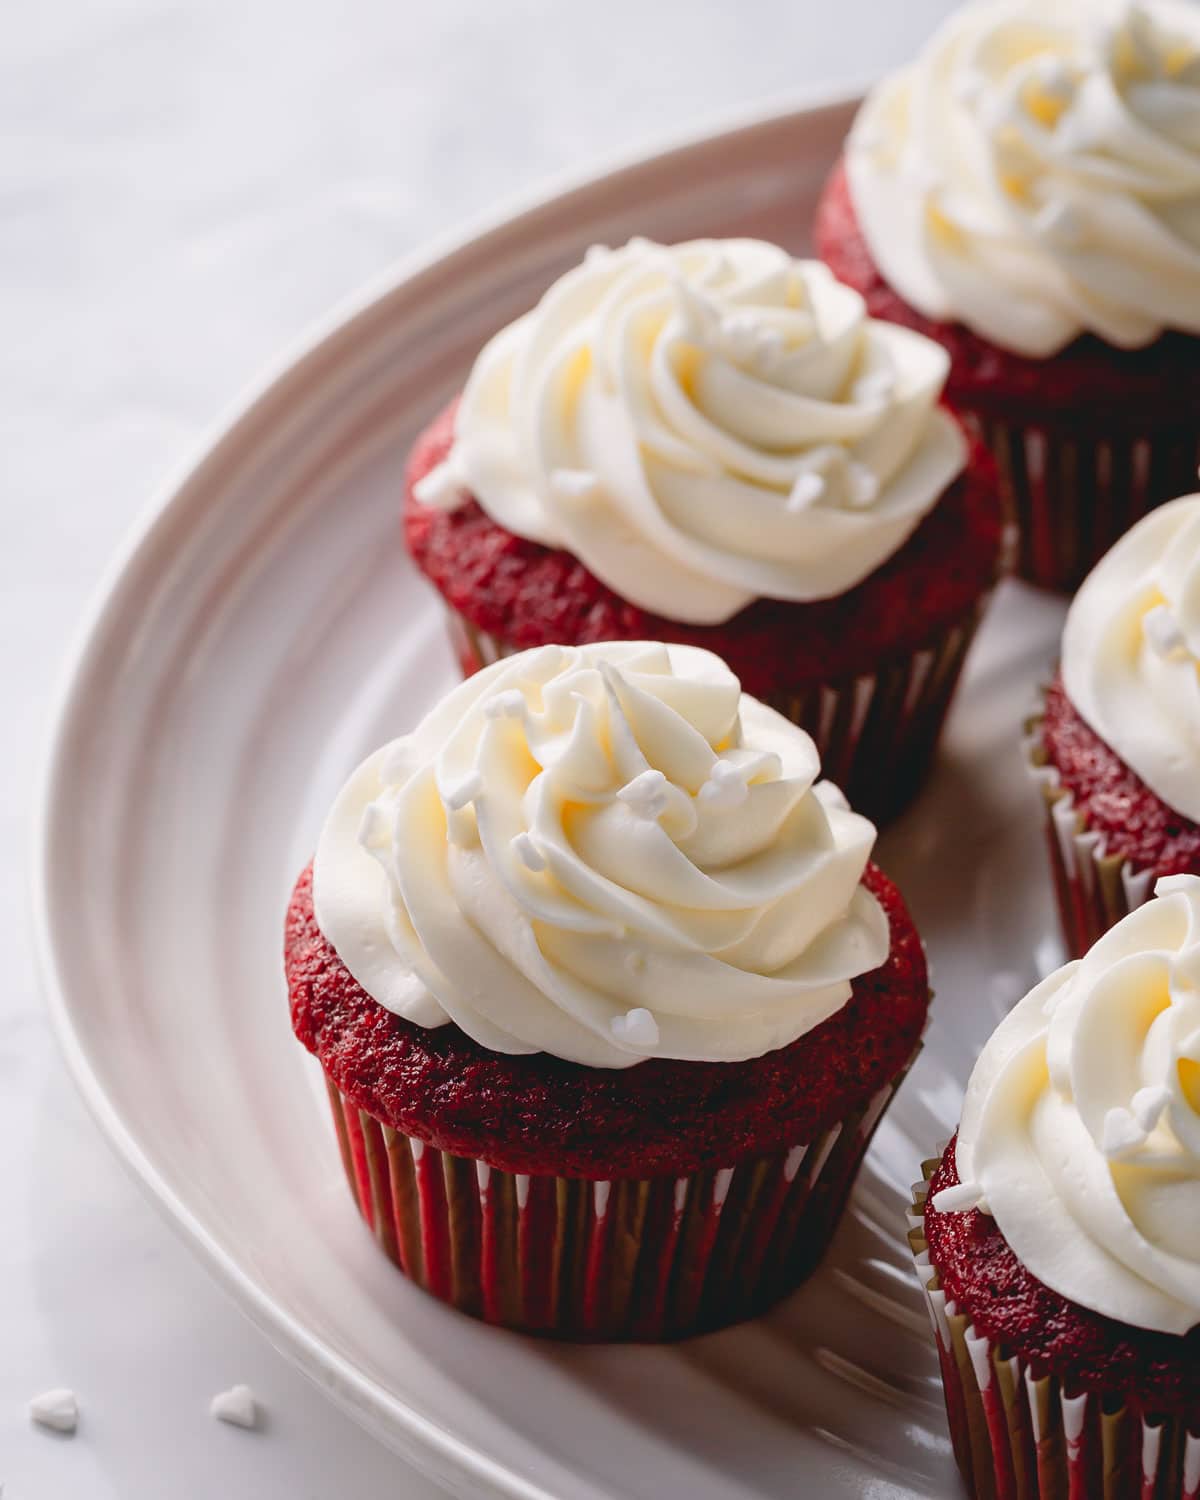 A platter of red velvet cupcakes with tall cream cheese frosting.